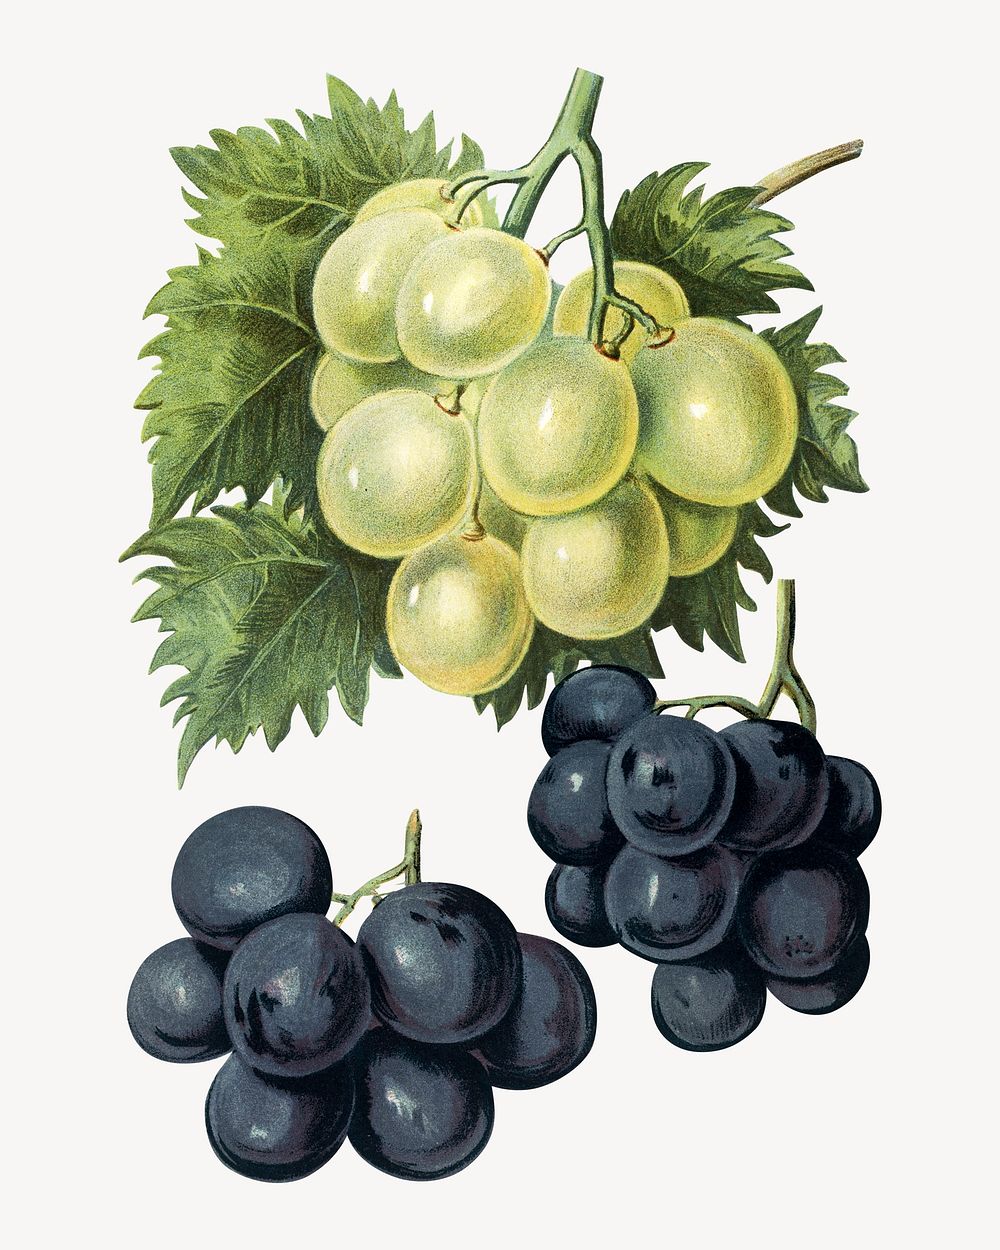 The fruit grower's guide : Vintage illustration of grapes